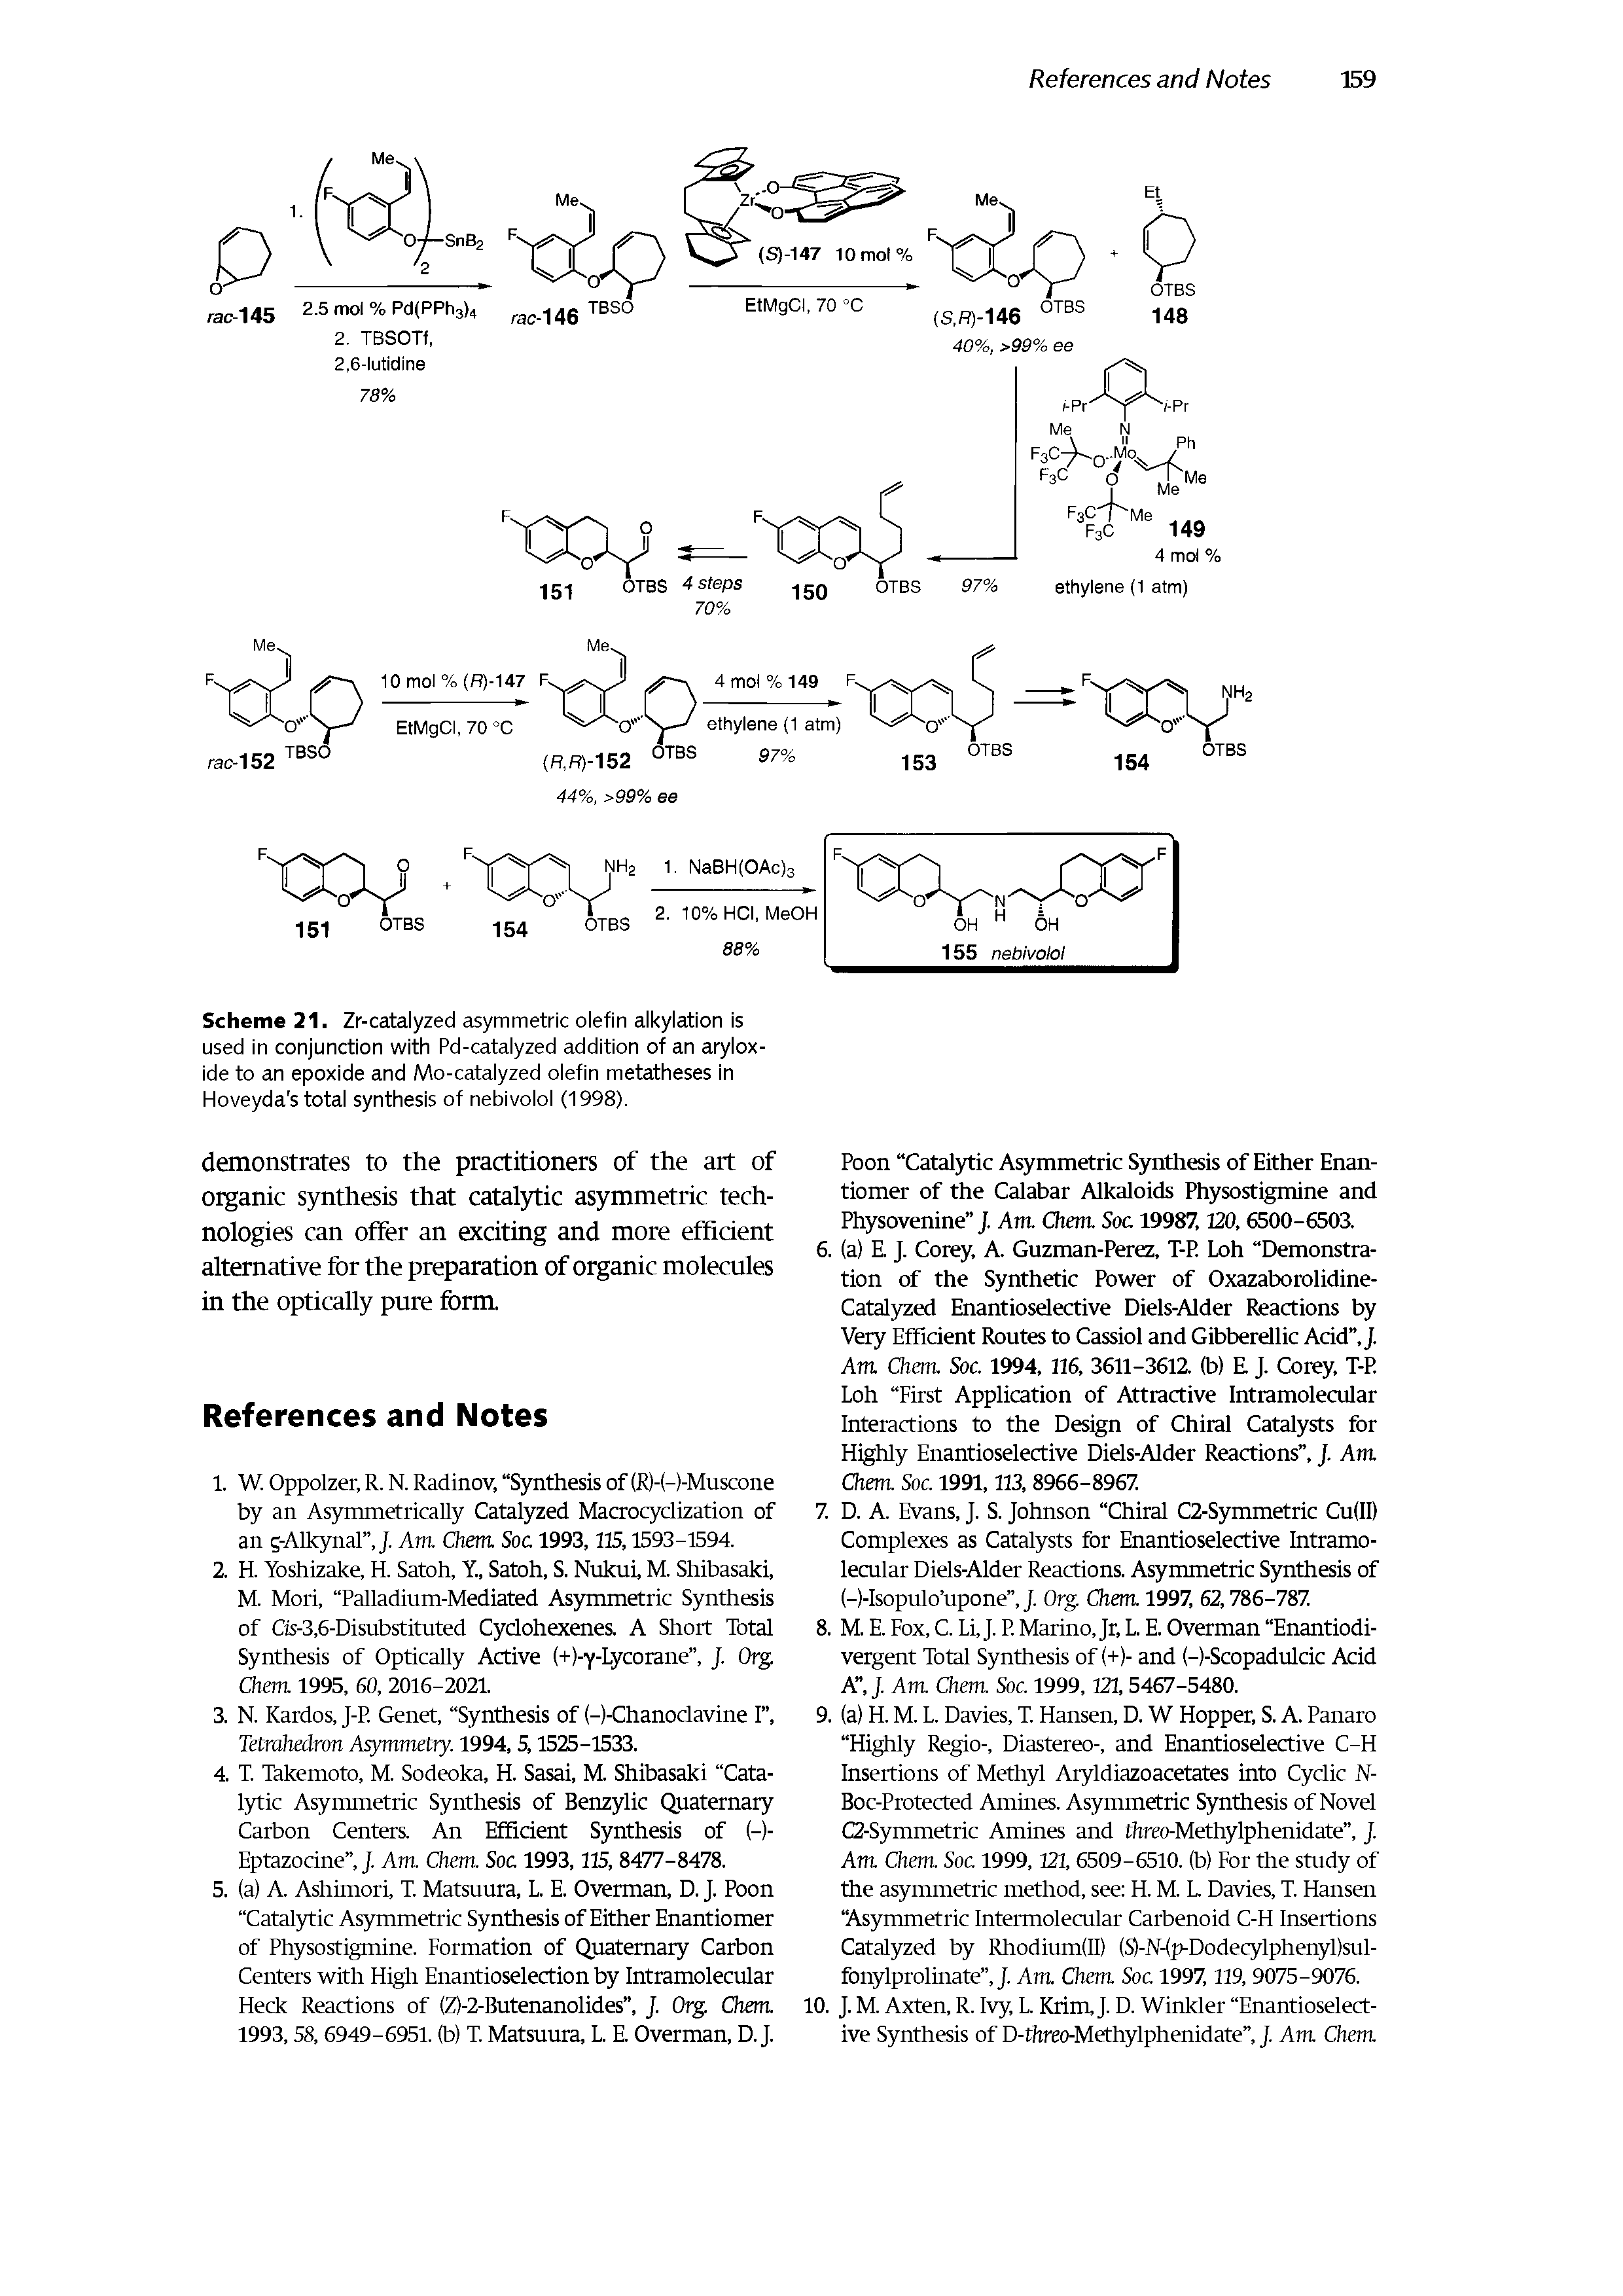 Scheme 21. Zr-catalyzed asymmetric olefin alkylation is used in conjunction with Pd-catalyzed addition of an arylox-ide to an epoxide and Mo-catalyzed olefin metatheses in Hoveyda s total synthesis of nebivolol (1998).